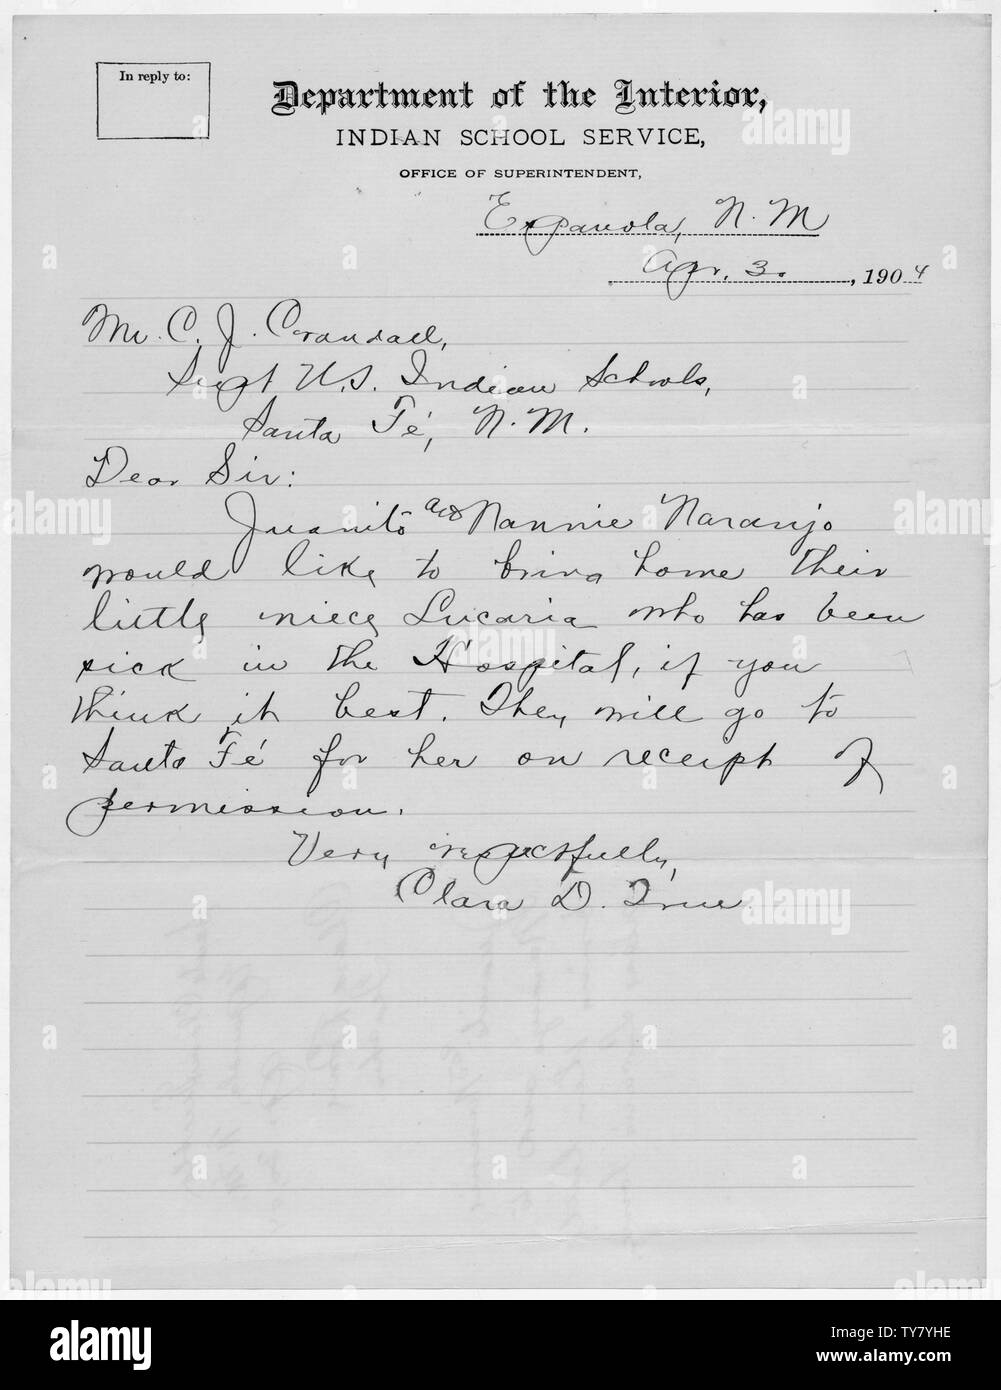 Letter to Superintendent concerning the Naranjos bringing home a sick niece.; Scope and content:  Letter to Supt. Crandall from Miss True requesting permission on behalf of Nannie and Juanito Naranjo to bring their niece, Lucaria, home to the Santa Clara pueblo. Their niece is ill and in the hospital in Santa Fe. Stock Photo